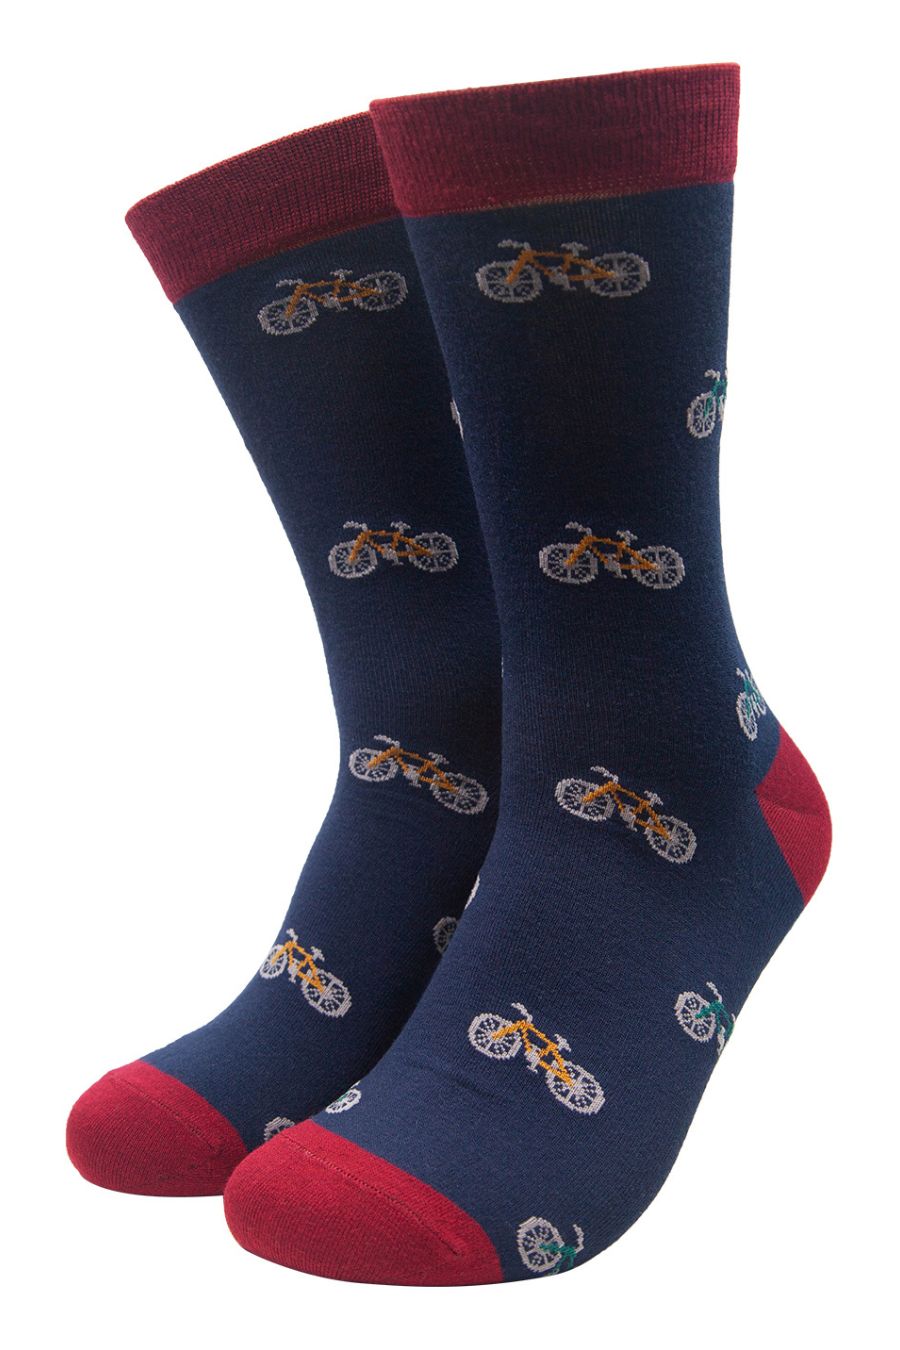 navy blue and burgundy dress socks with mountain bikes all over